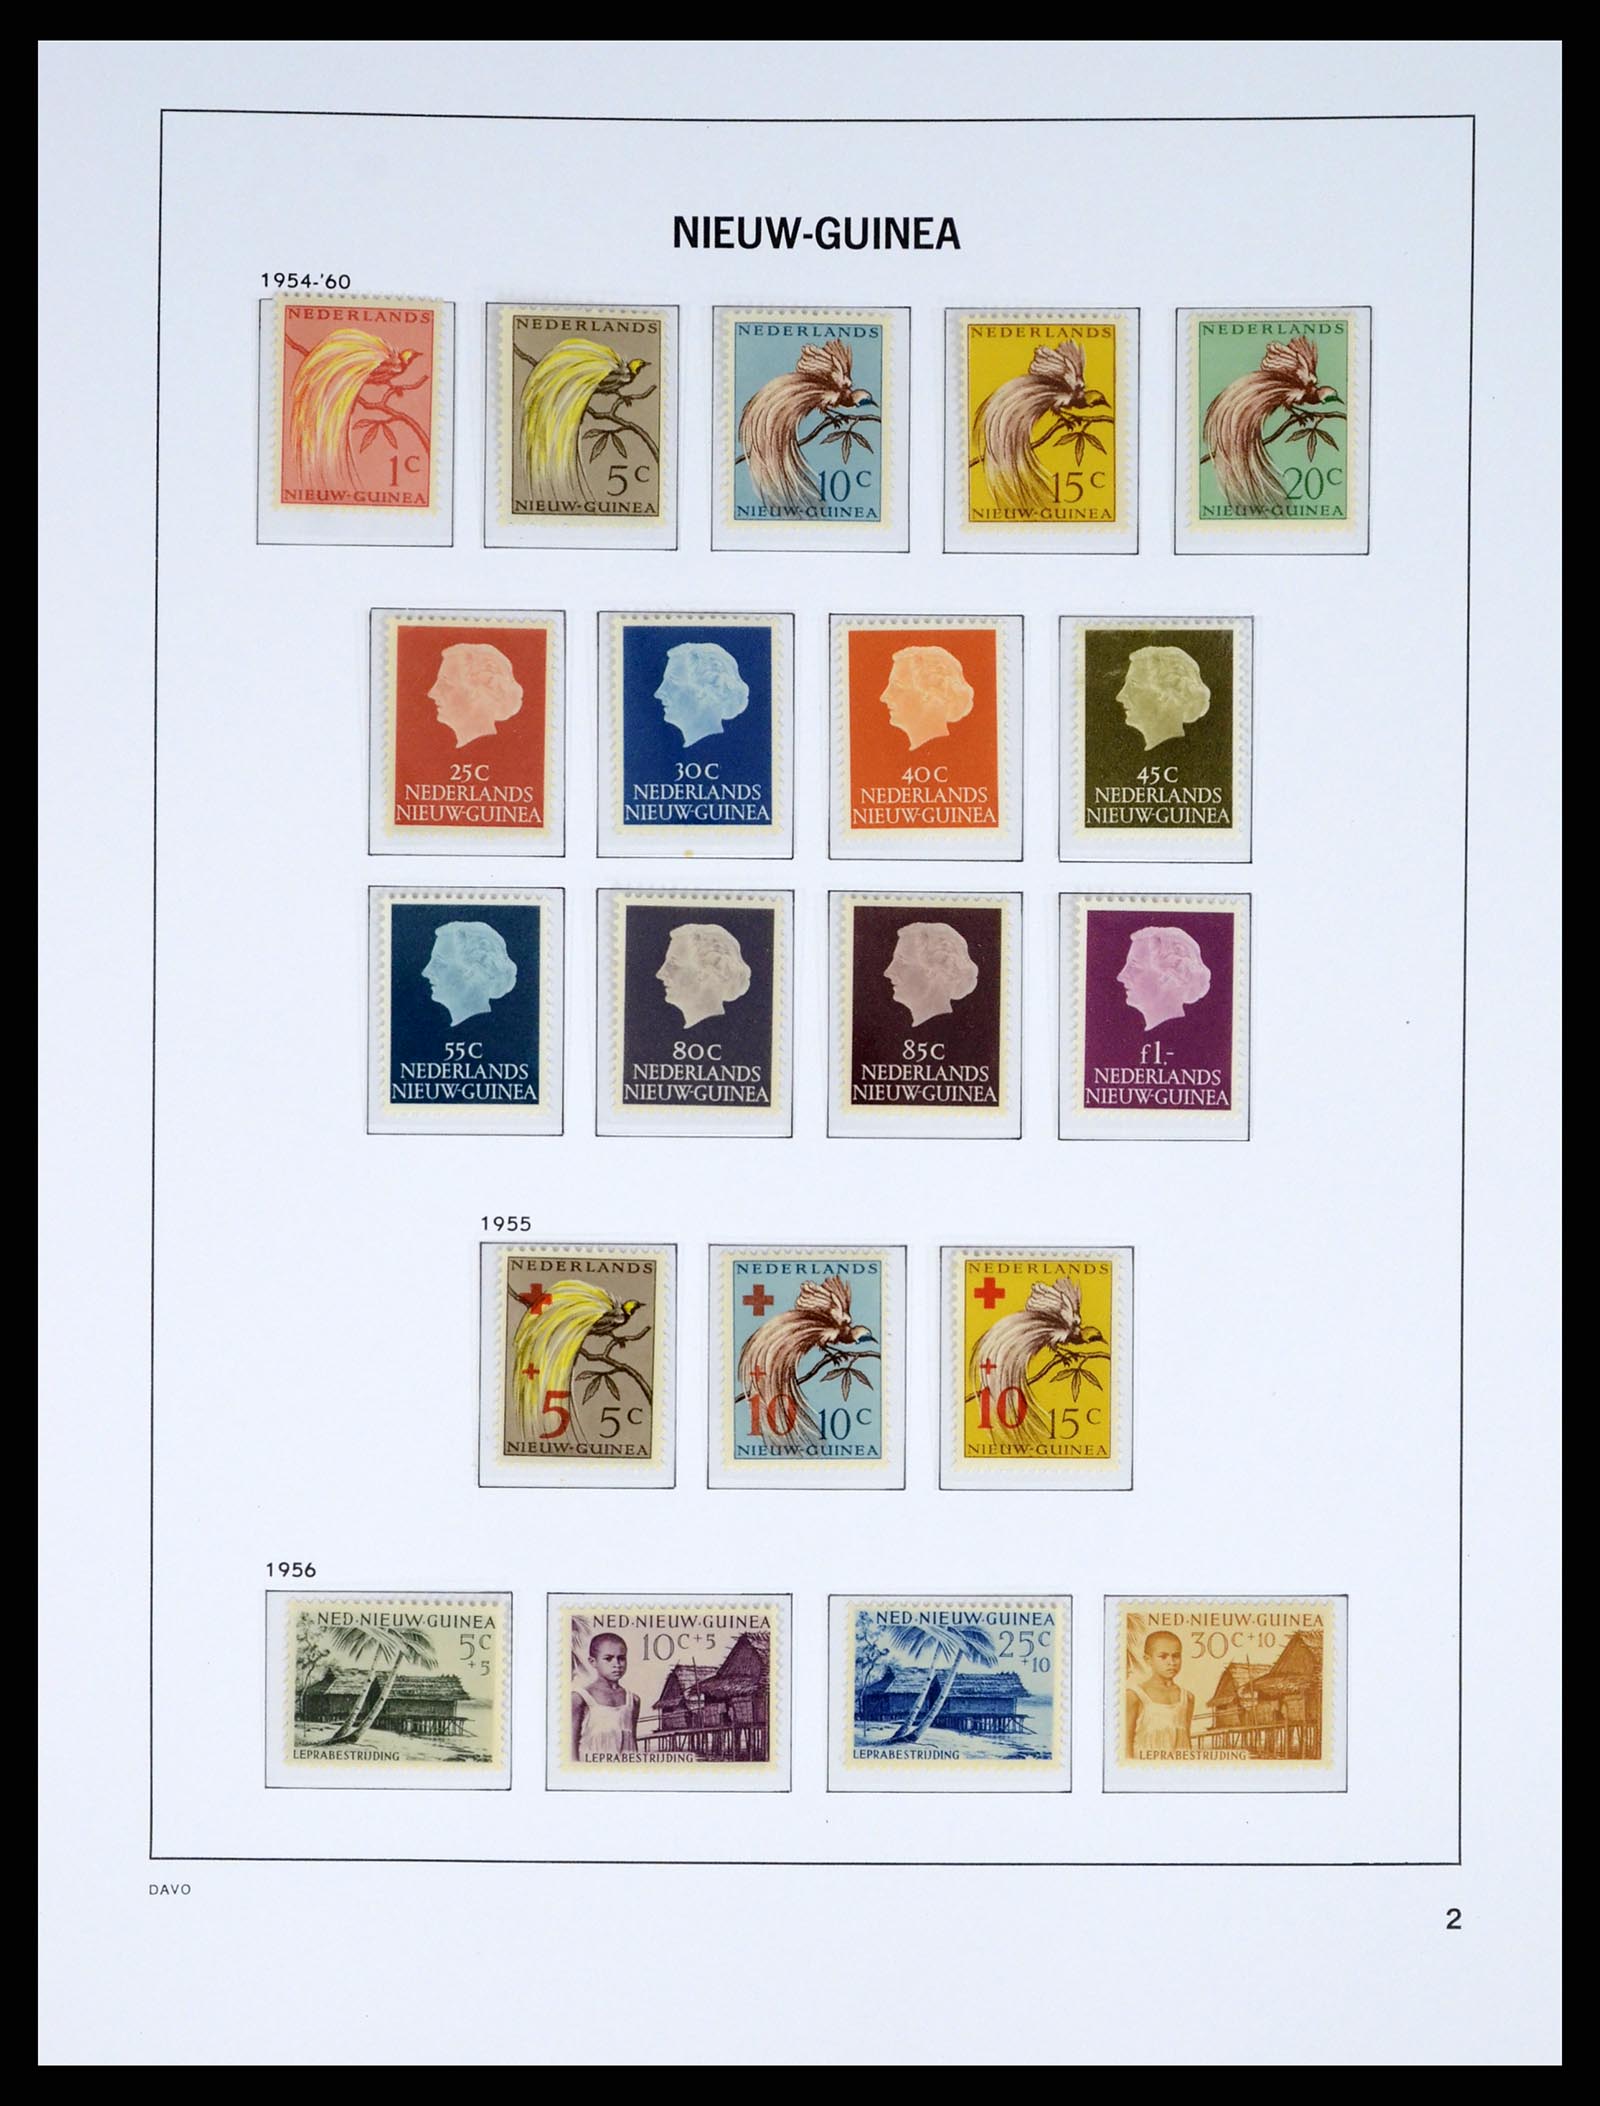 37332 035 - Stamp collection 37332 Dutch East Indies 1864-1949.